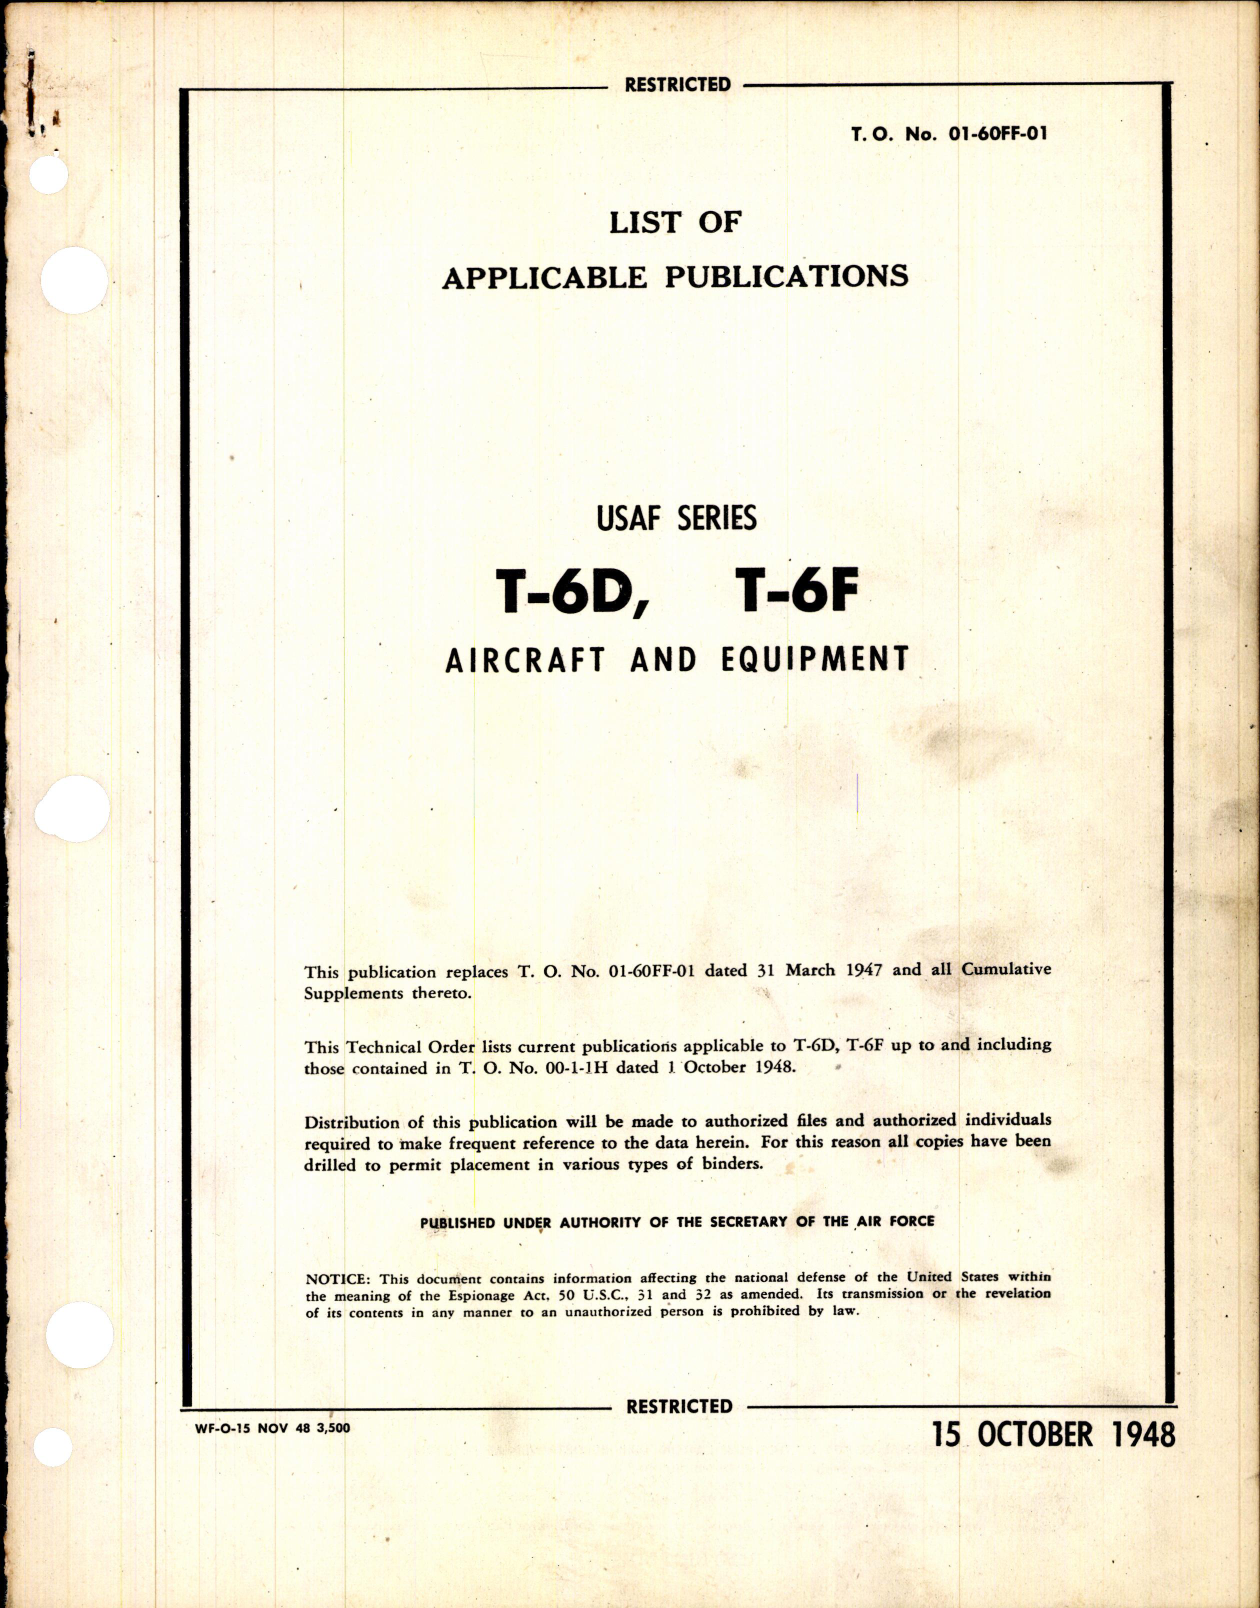 Sample page 1 from AirCorps Library document: List of Applicable Publications for T-6D, & T-6F 